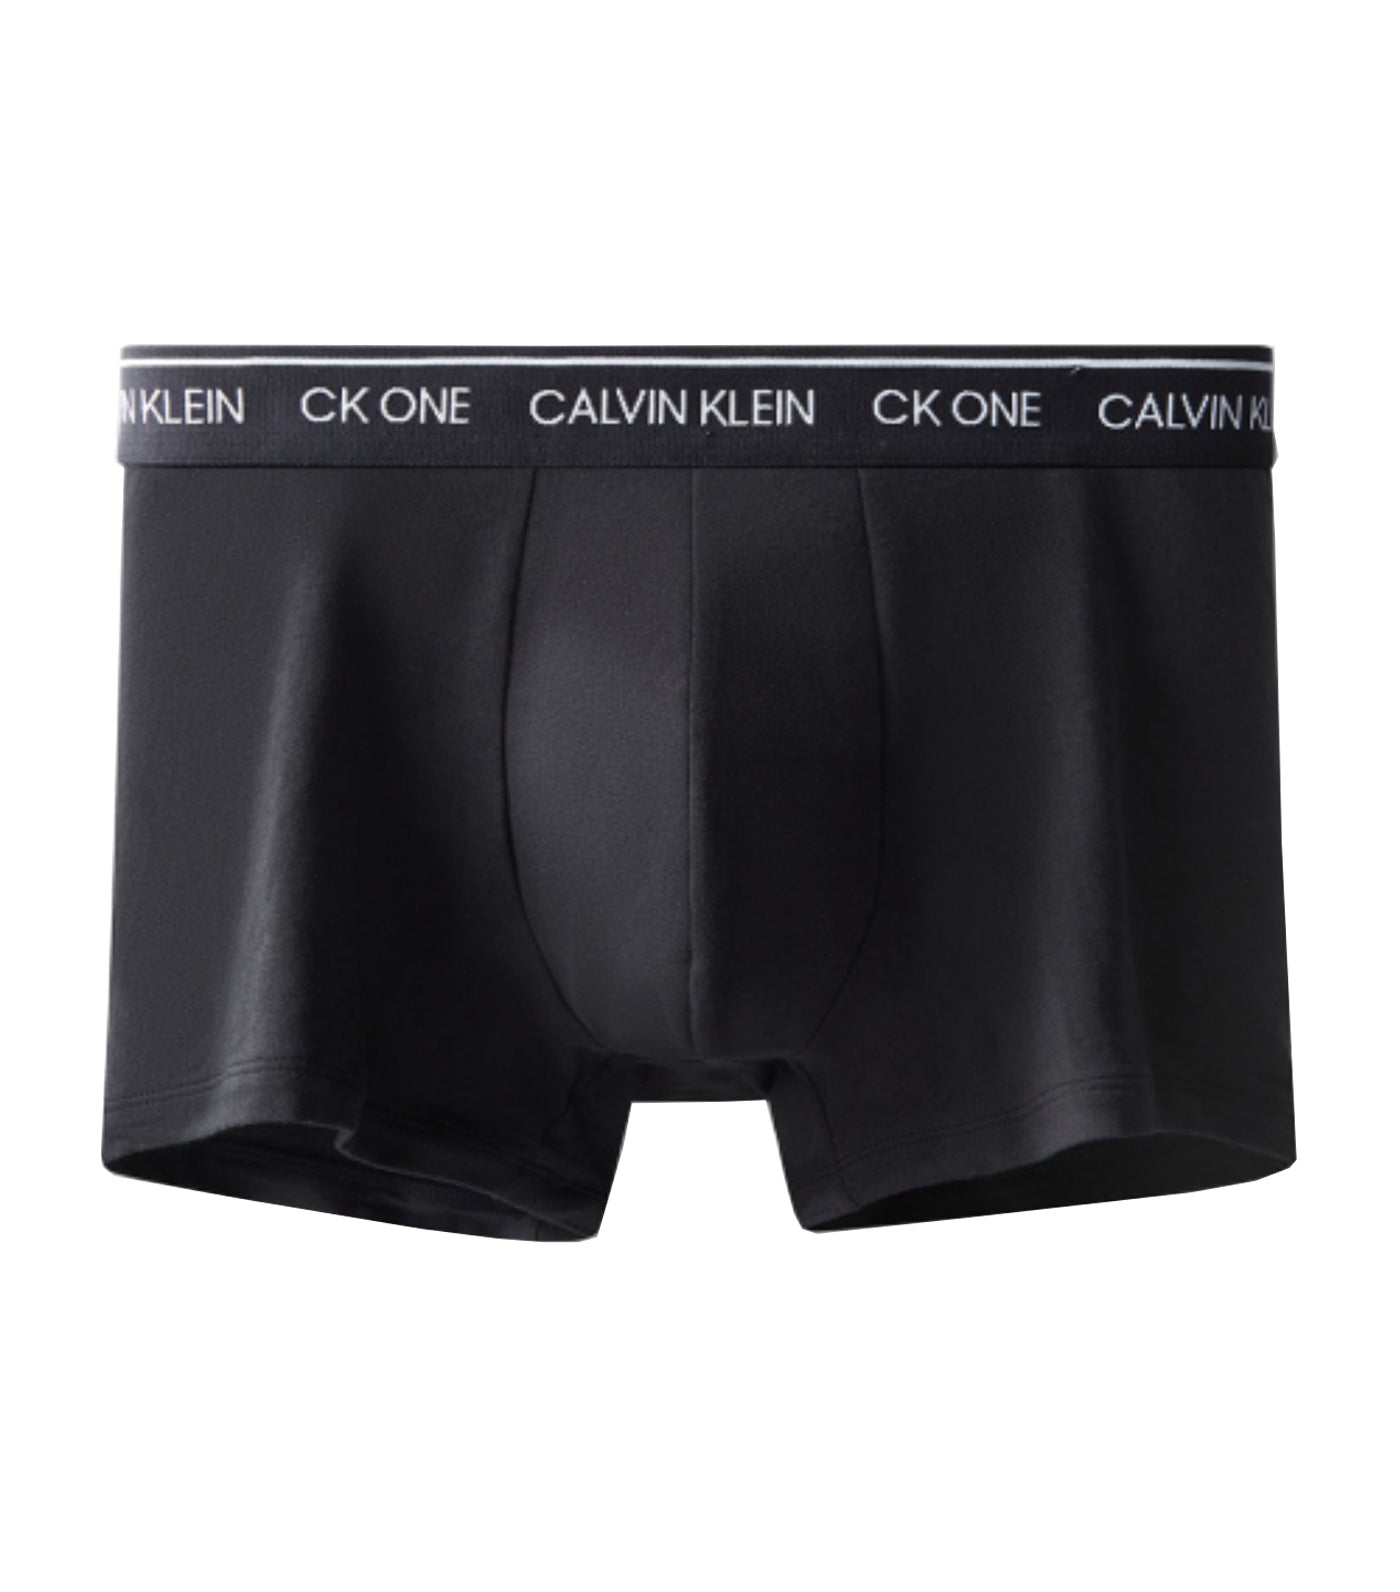  Calvin Klein Men's Modern Cotton Stretch Trunk, Black, Large :  Clothing, Shoes & Jewelry